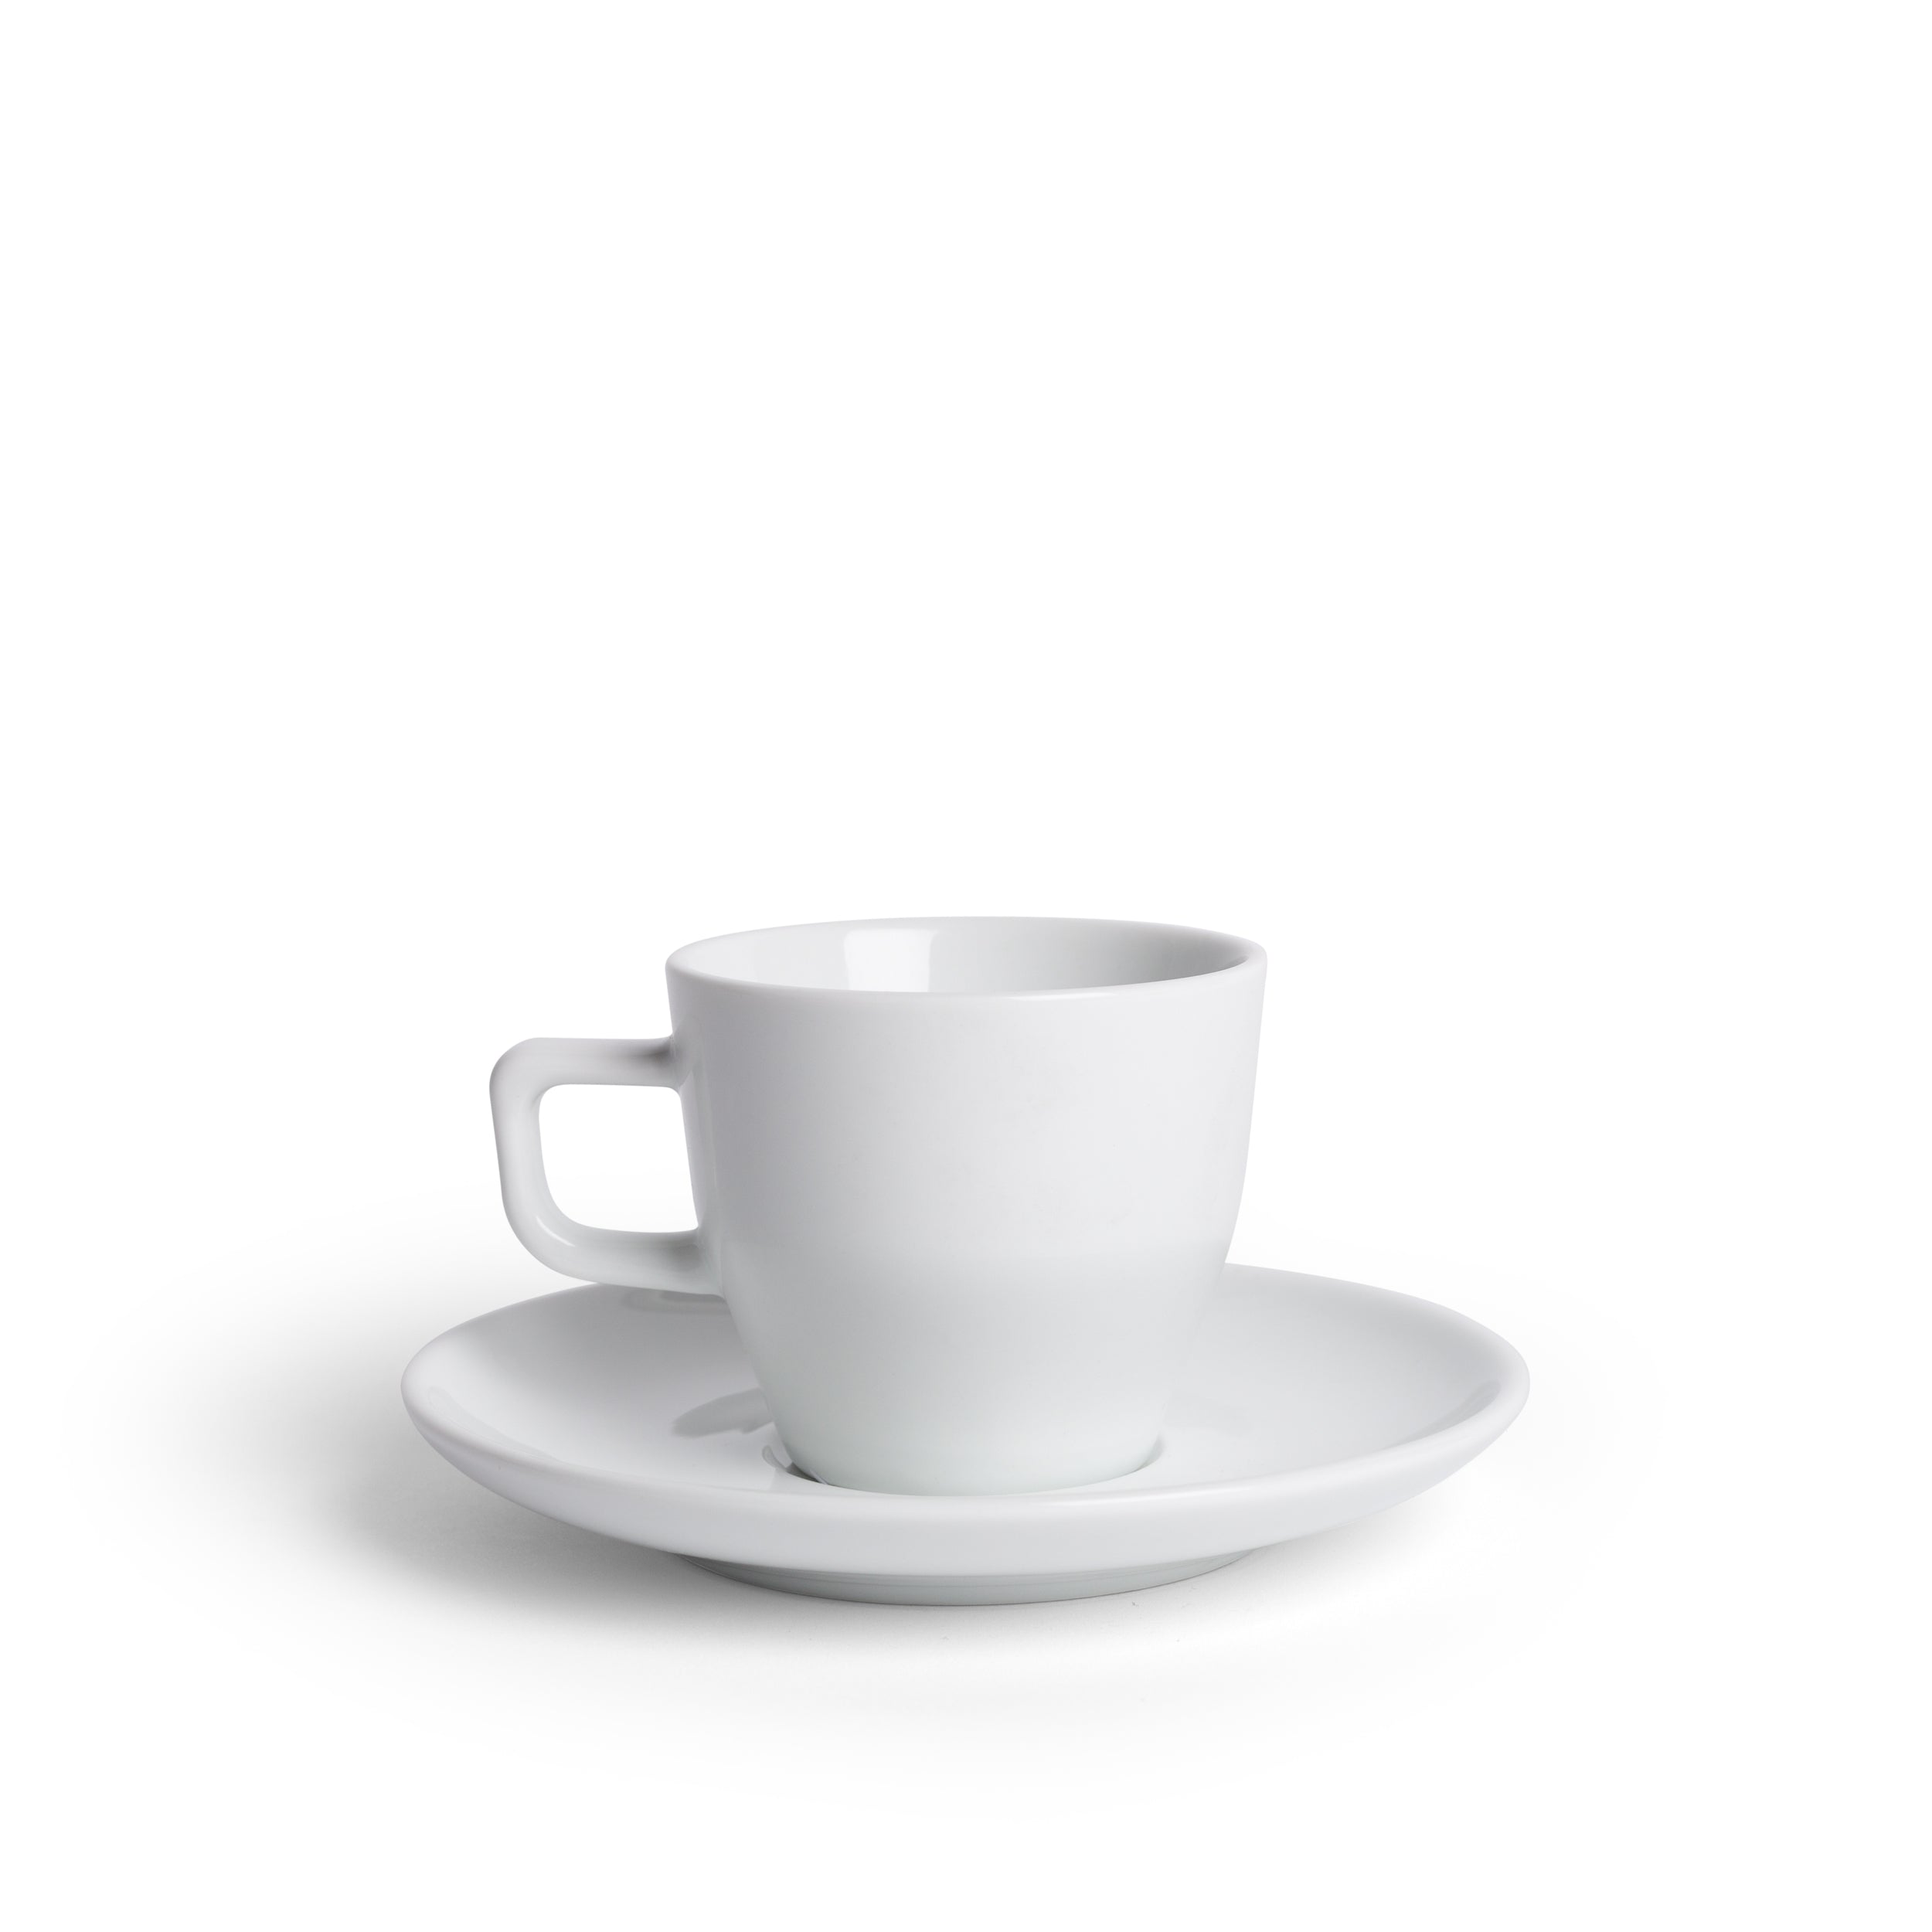 ACME x COFFEE COLLECTIVE Coffee Cups and Saucer Set